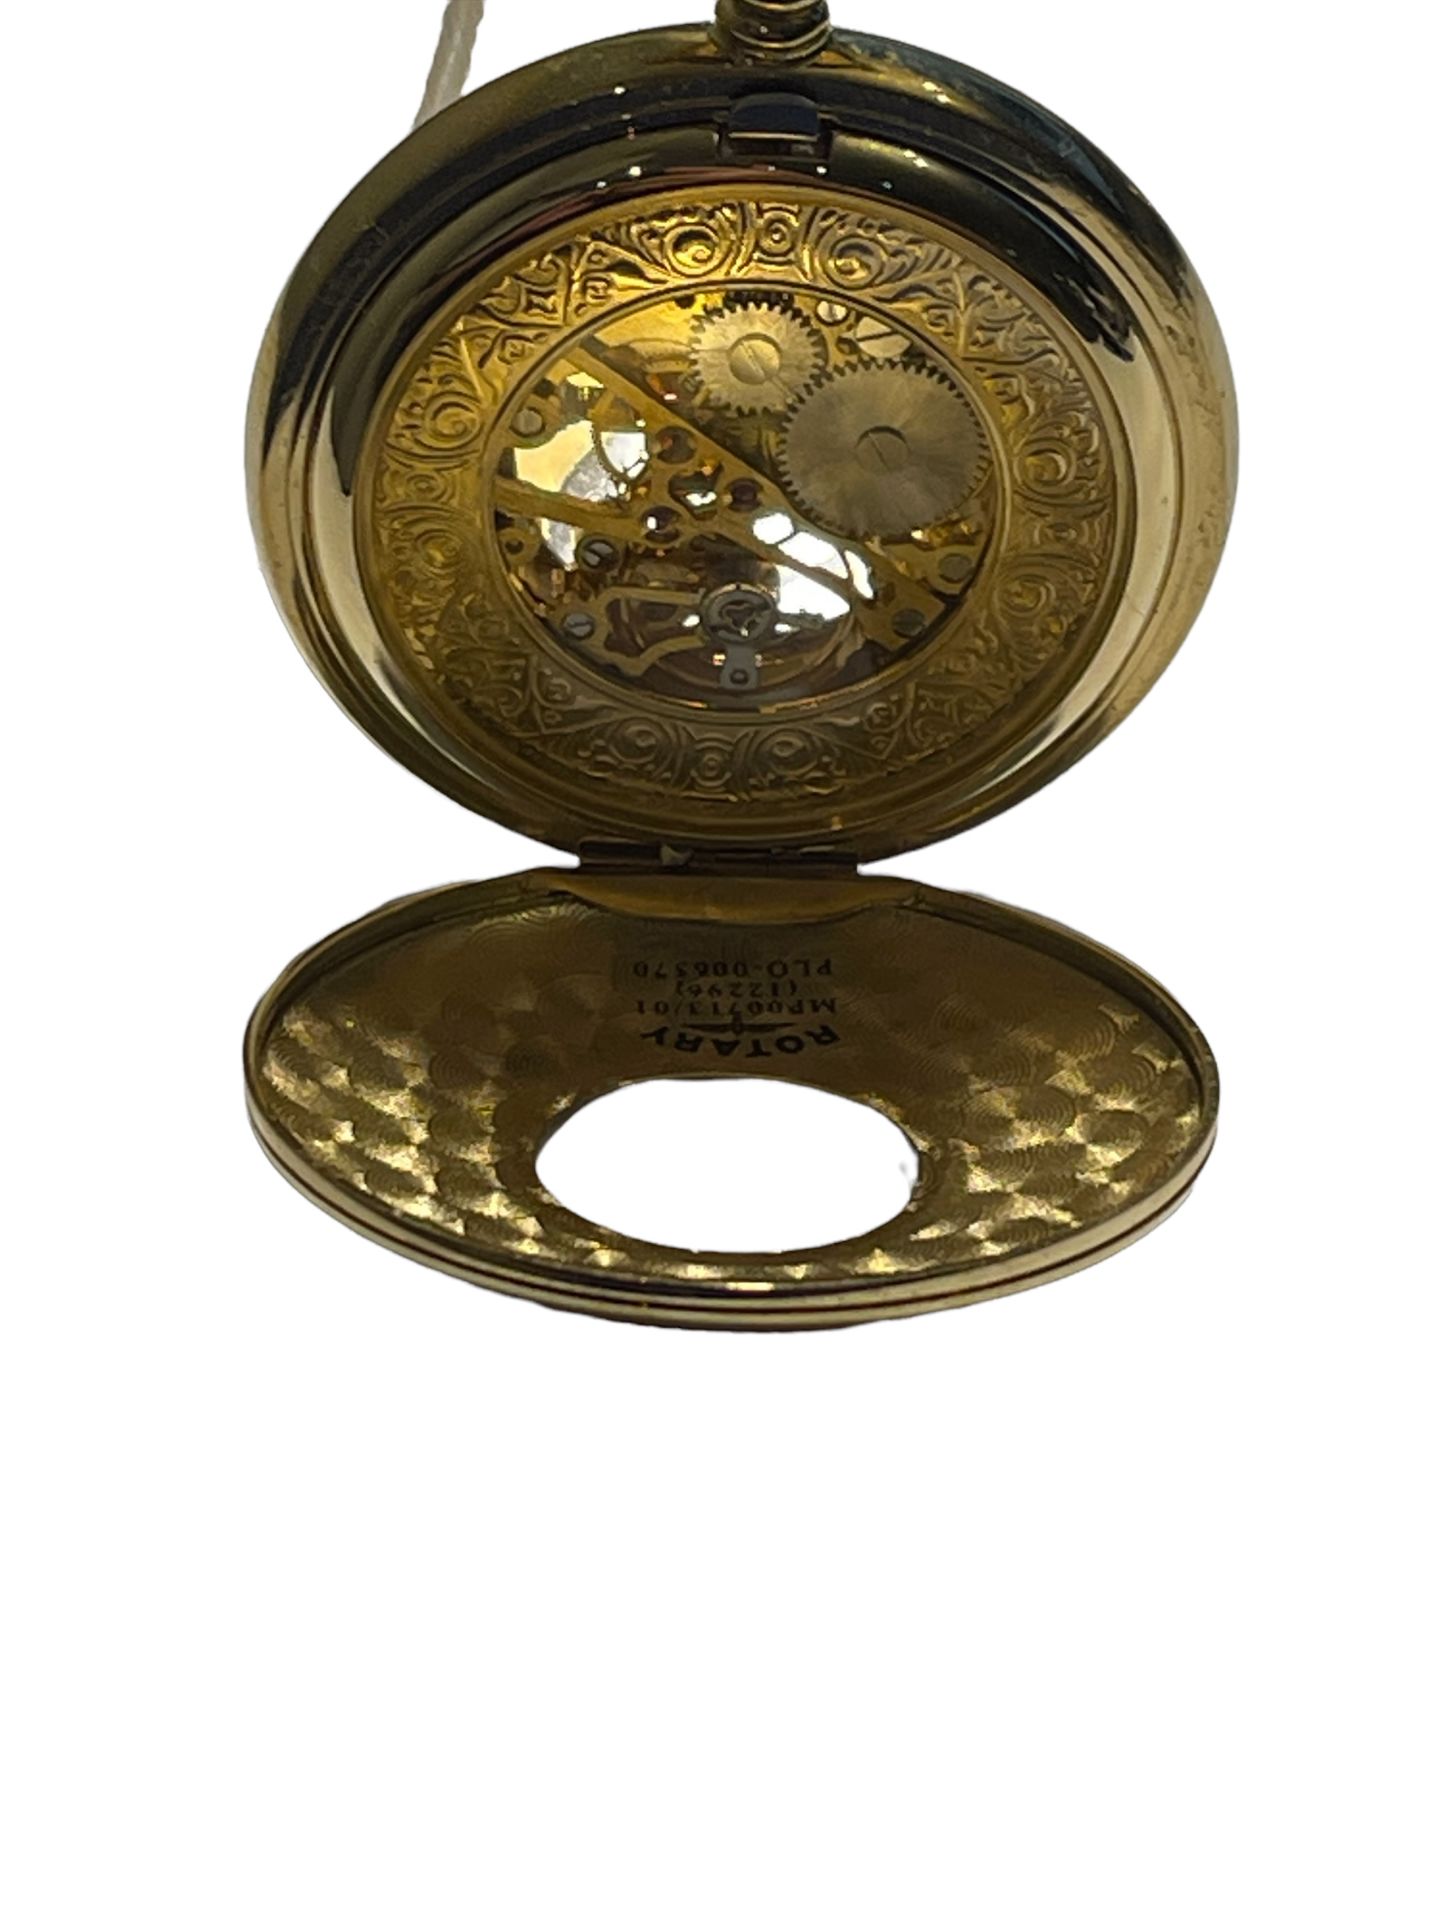 Gold Plated Mechanical Rotary Pocket Watch RRP £209 - Ex Demo from our Private Jet Charter - Image 10 of 11